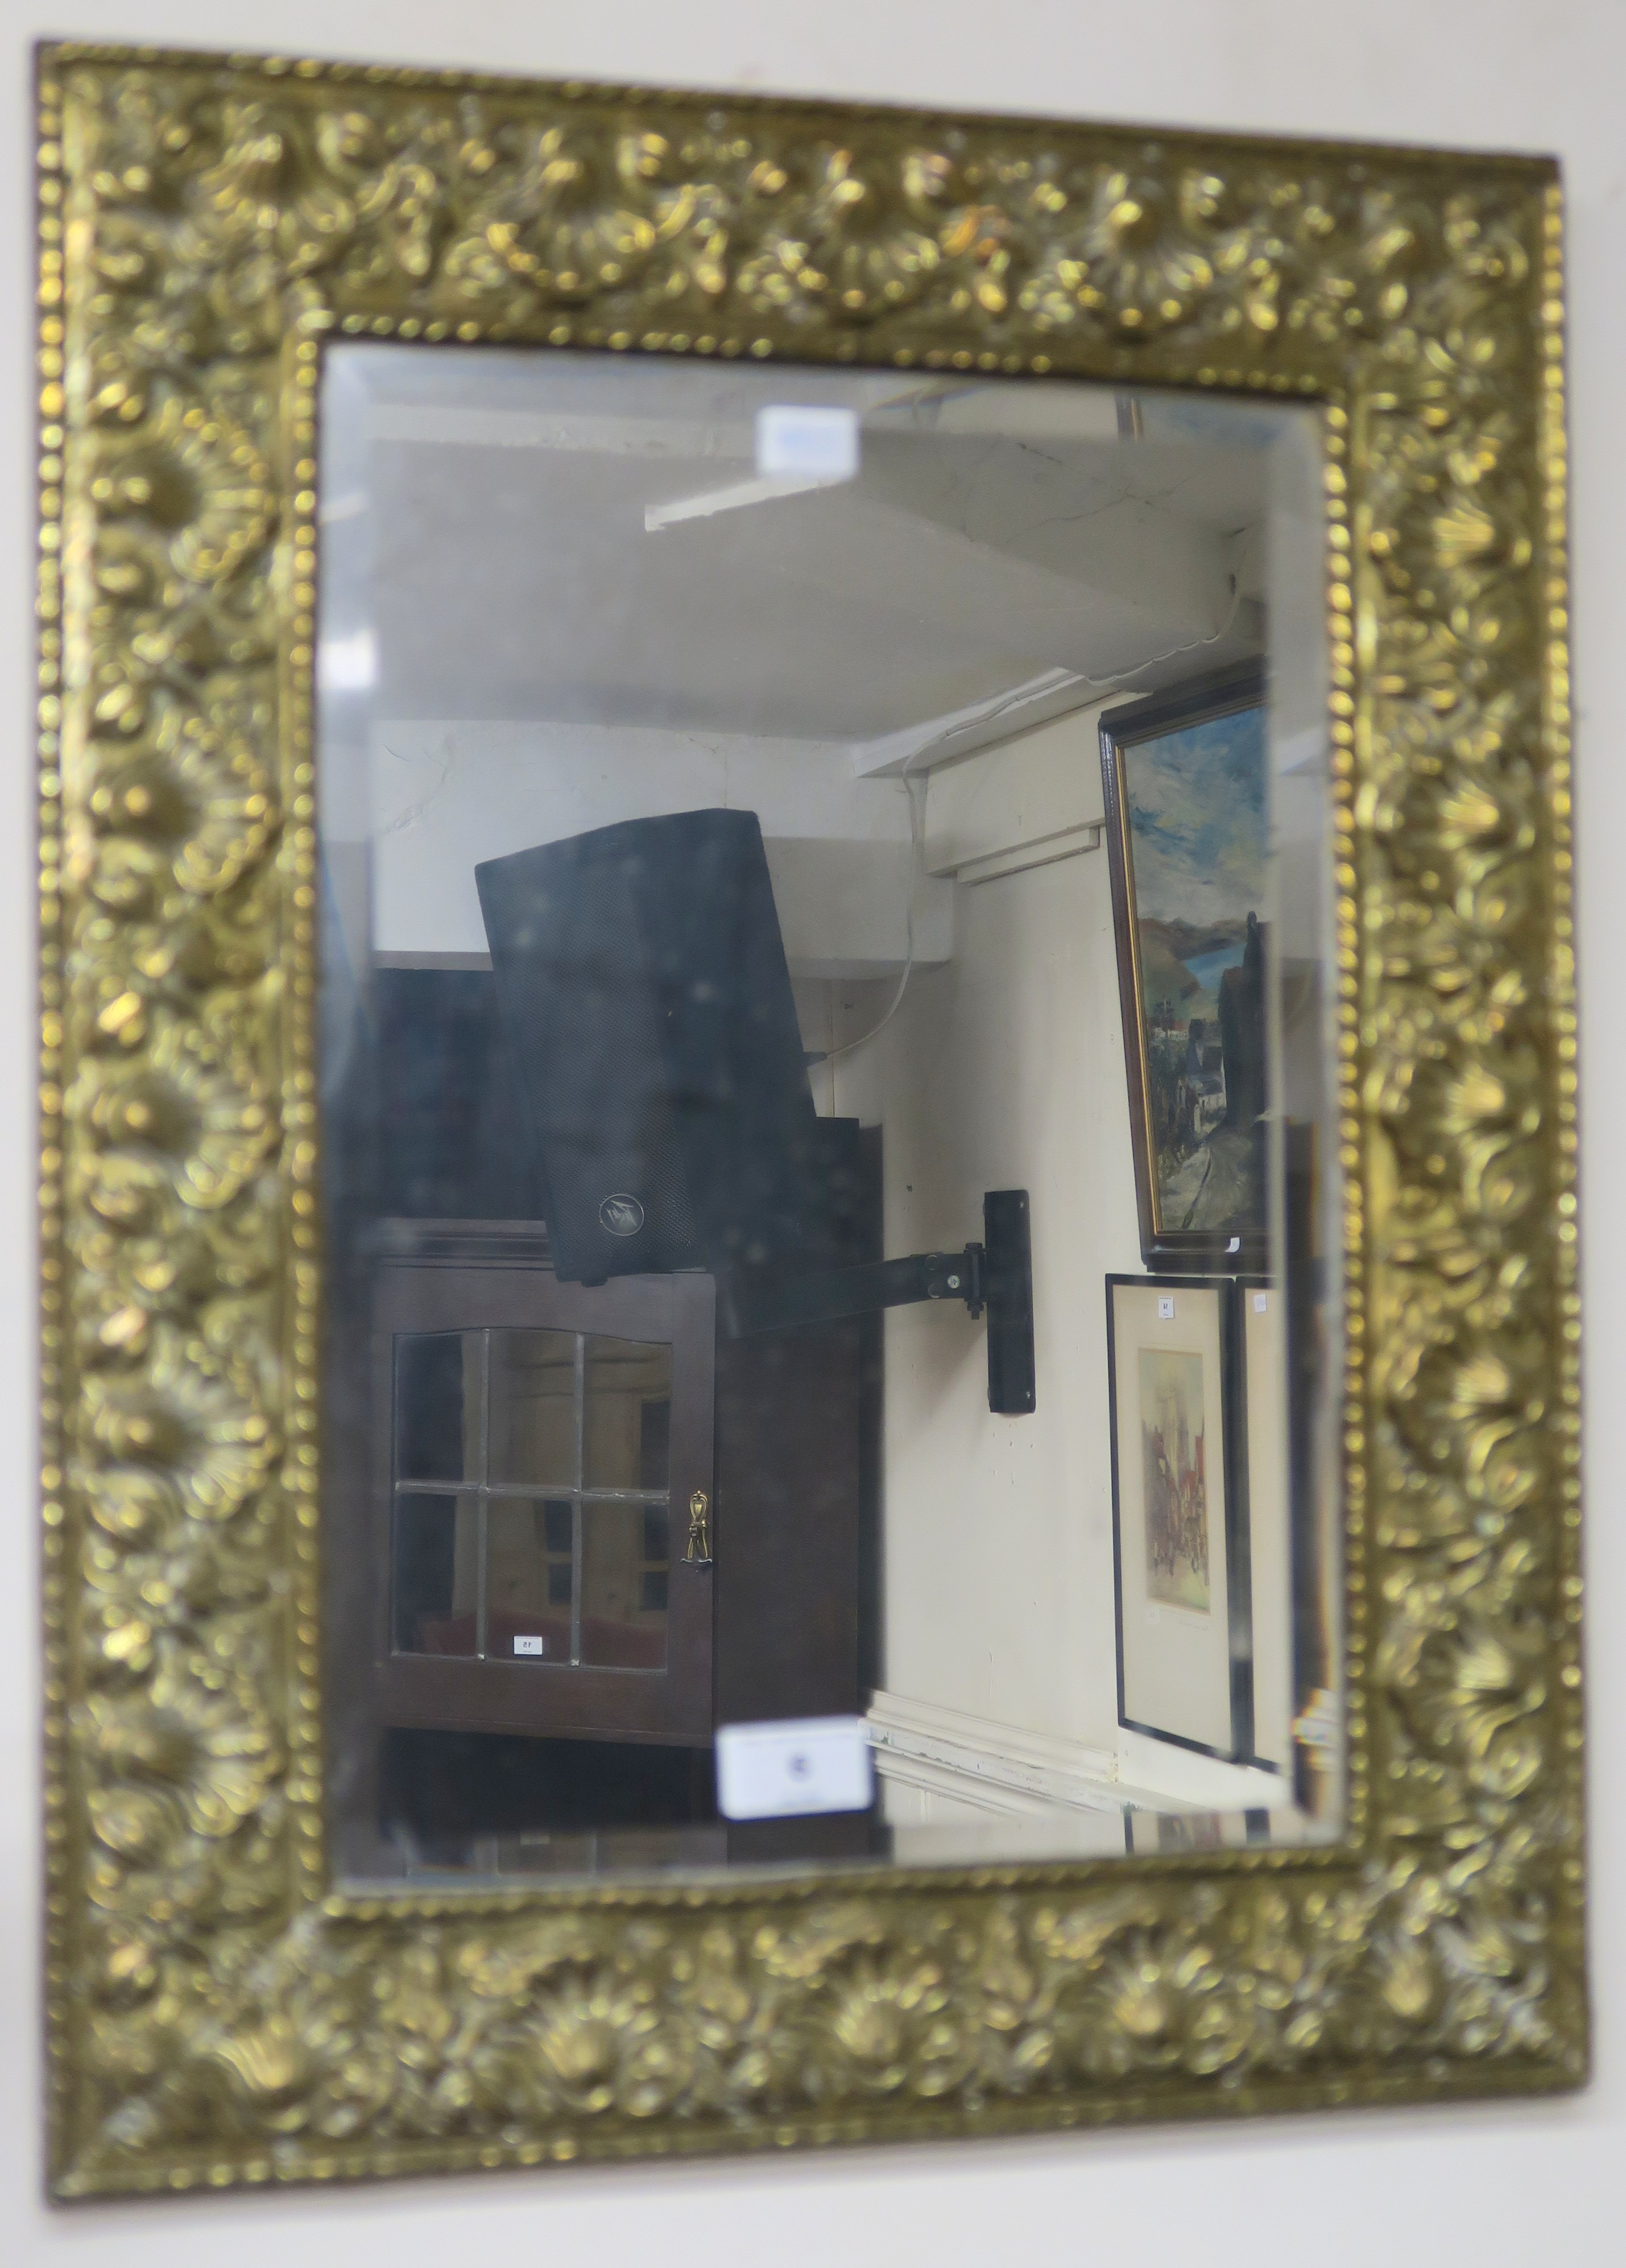 A brass wall mirror with bevelled glass, 56cm x 44cm Condition Report: Available upon request